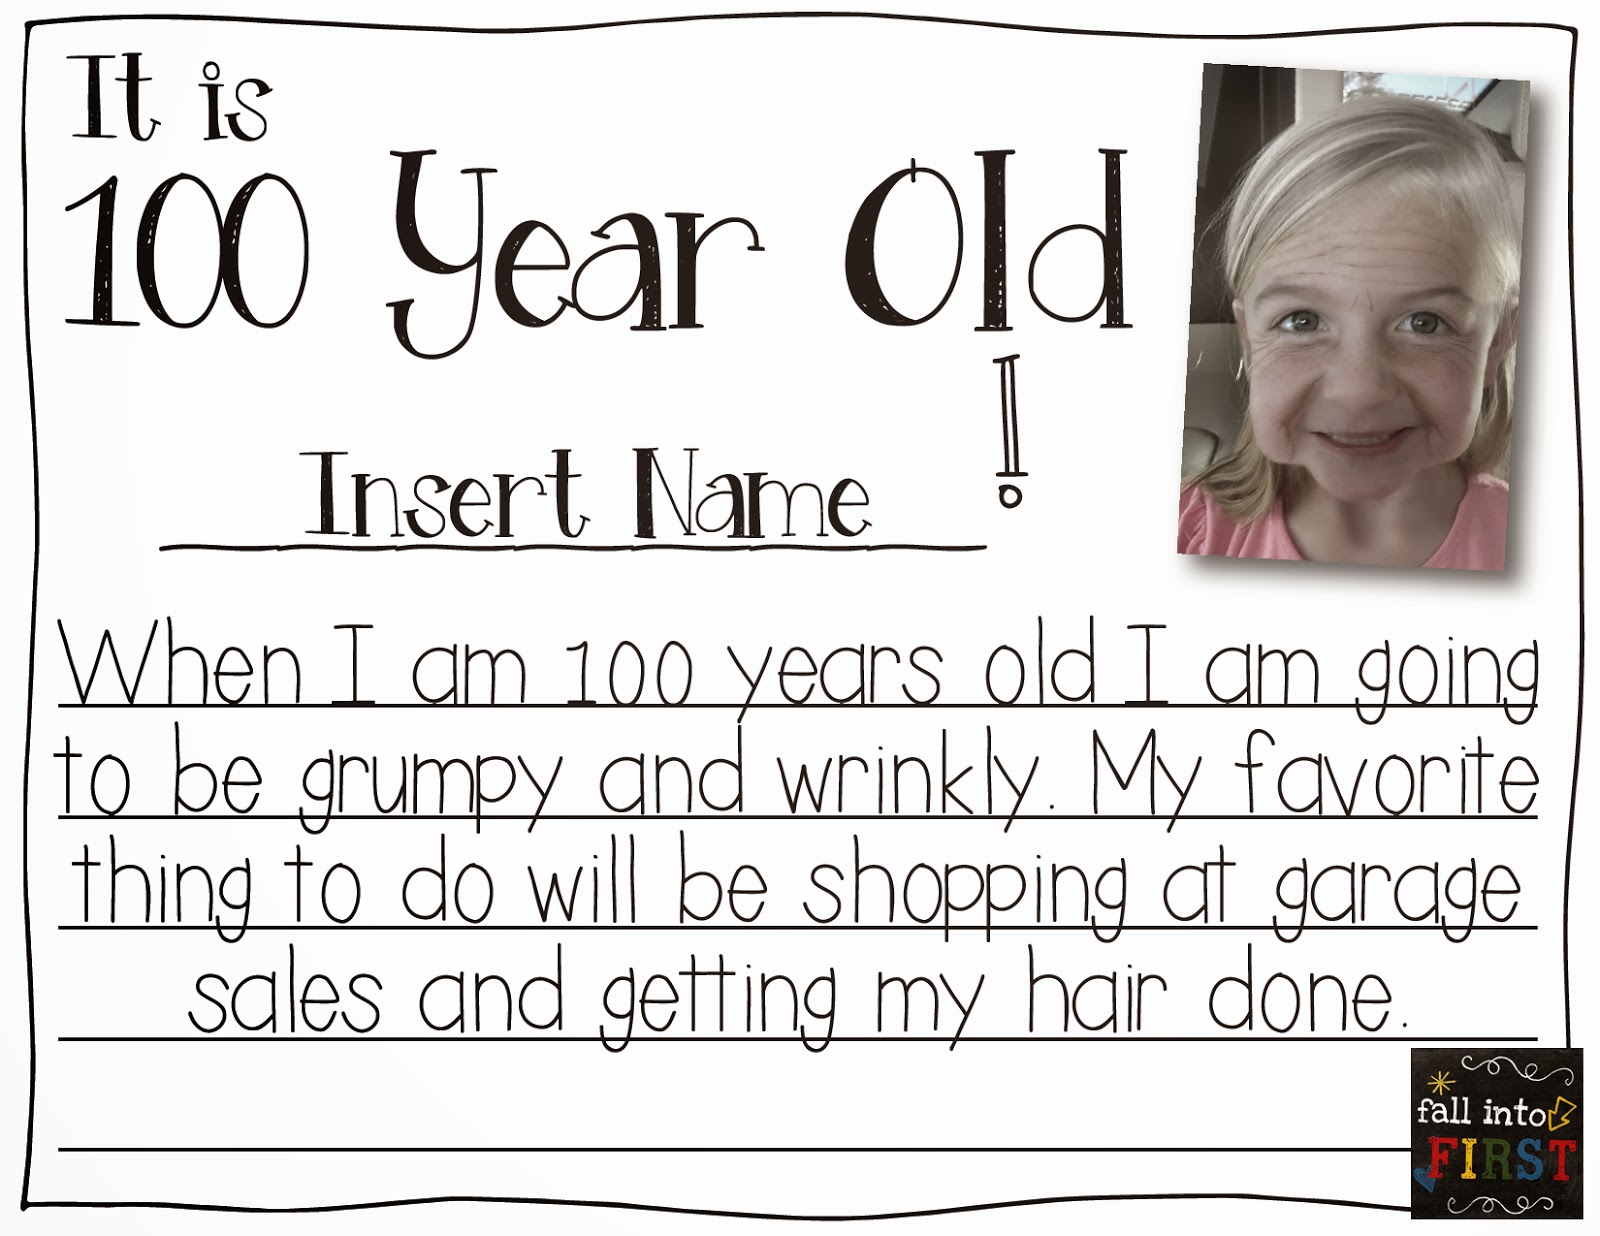 if i were 100 years old